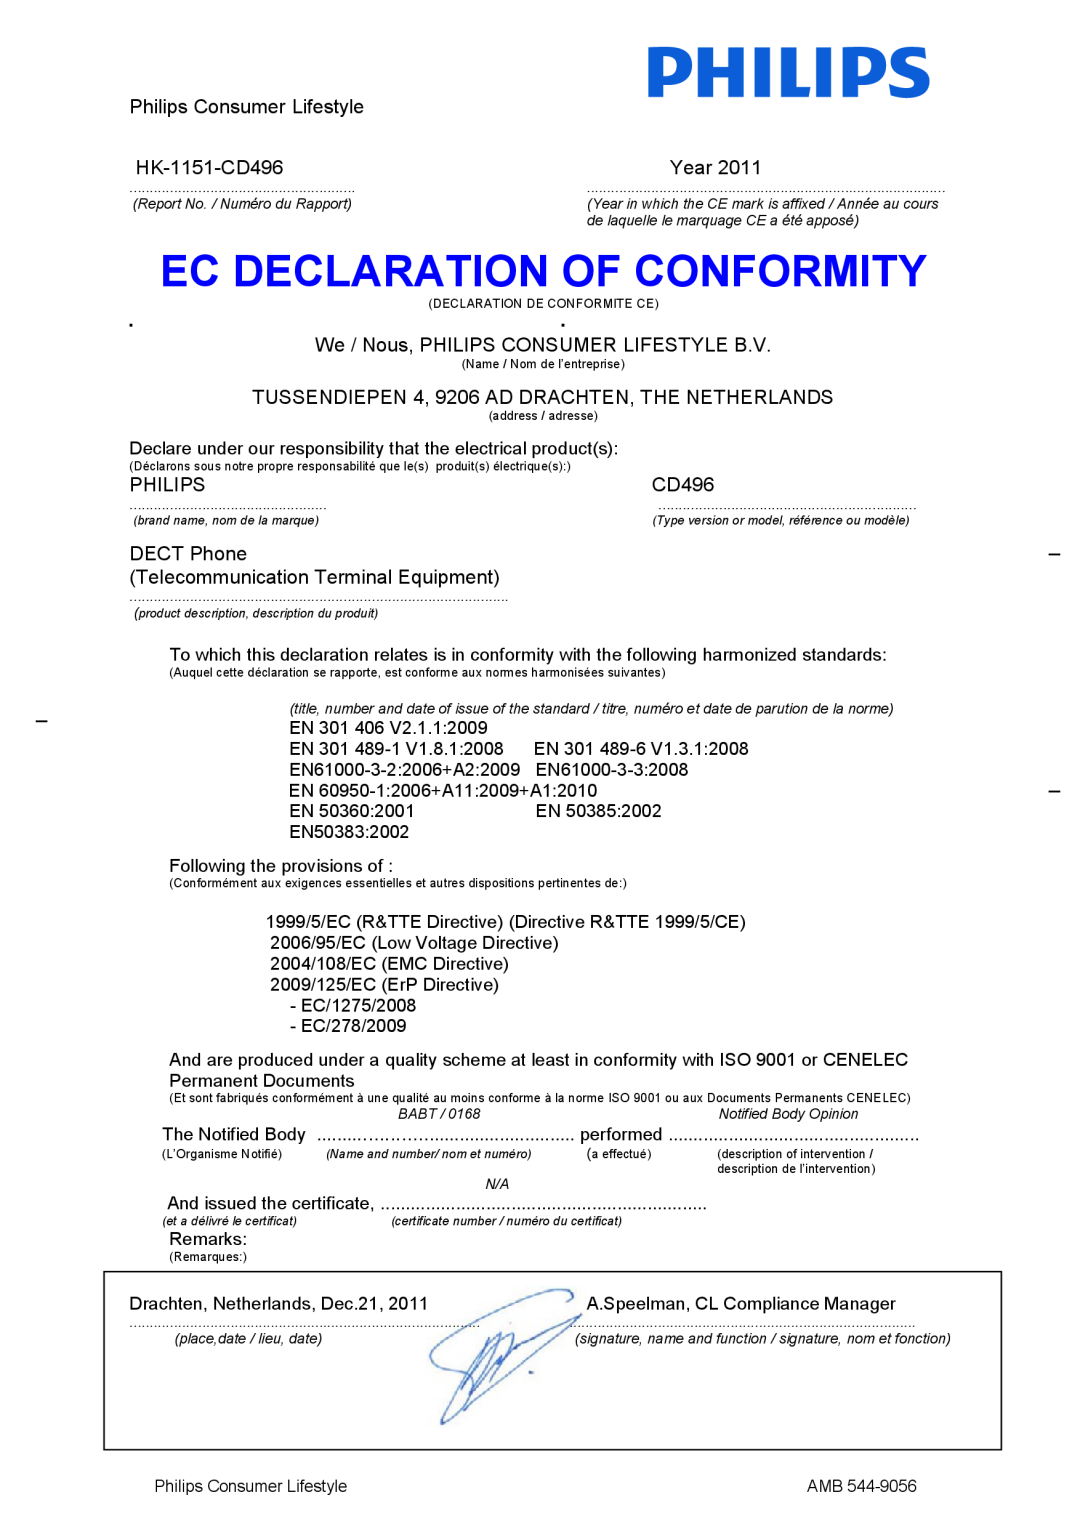 Philips CD491 user manual Ec Declaration Of Conformity, Philips Consumer Lifestyle, HK-1151-CD496, Year, DECT Phone 